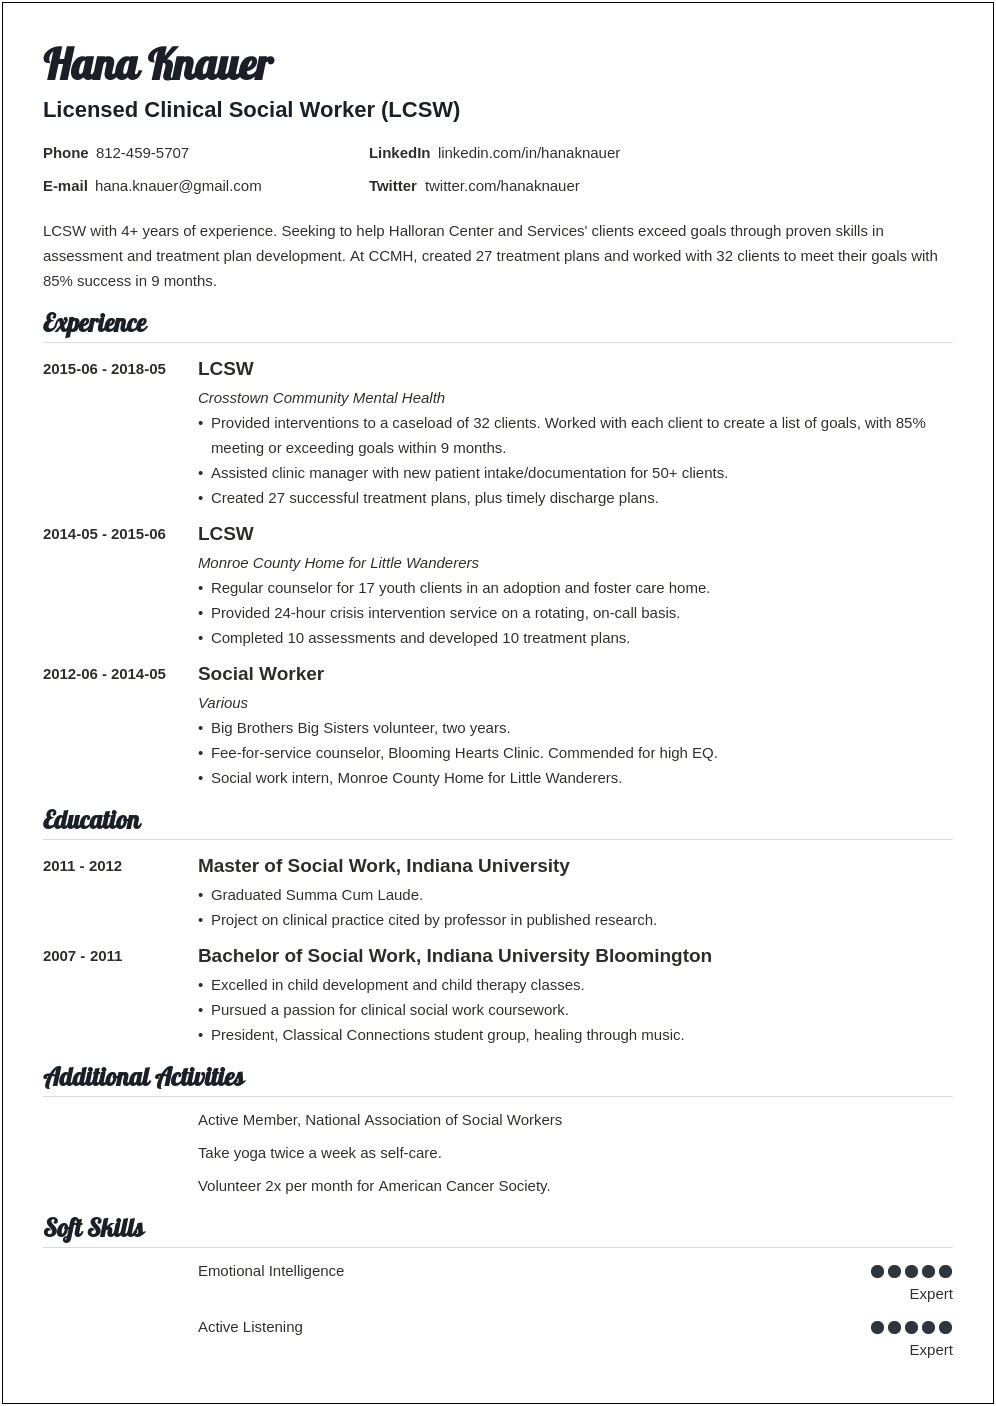 Resume Objective For Department Of Human Services